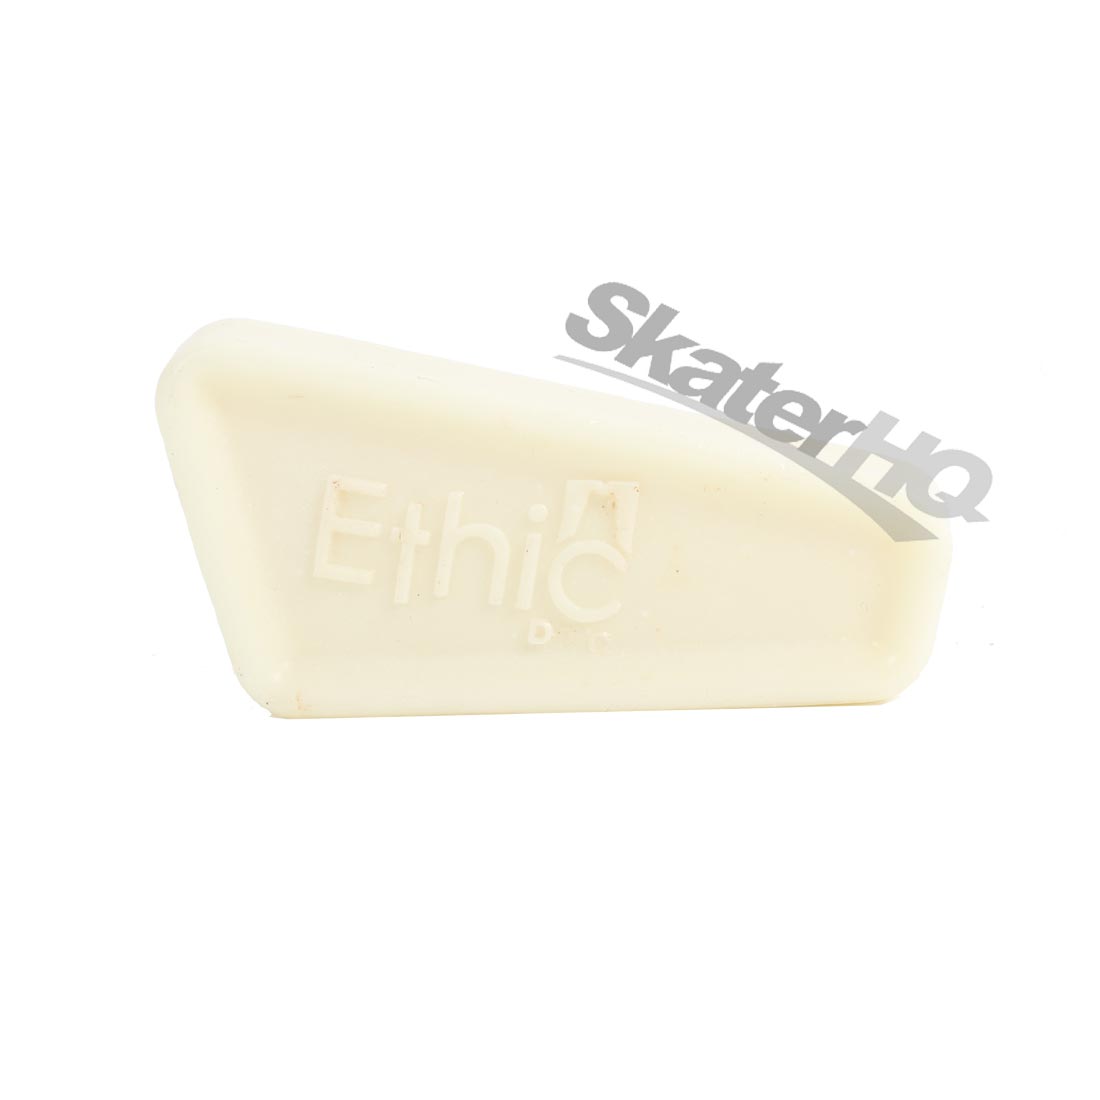 Ethic DTC Wax Block - White Scooter Accessories